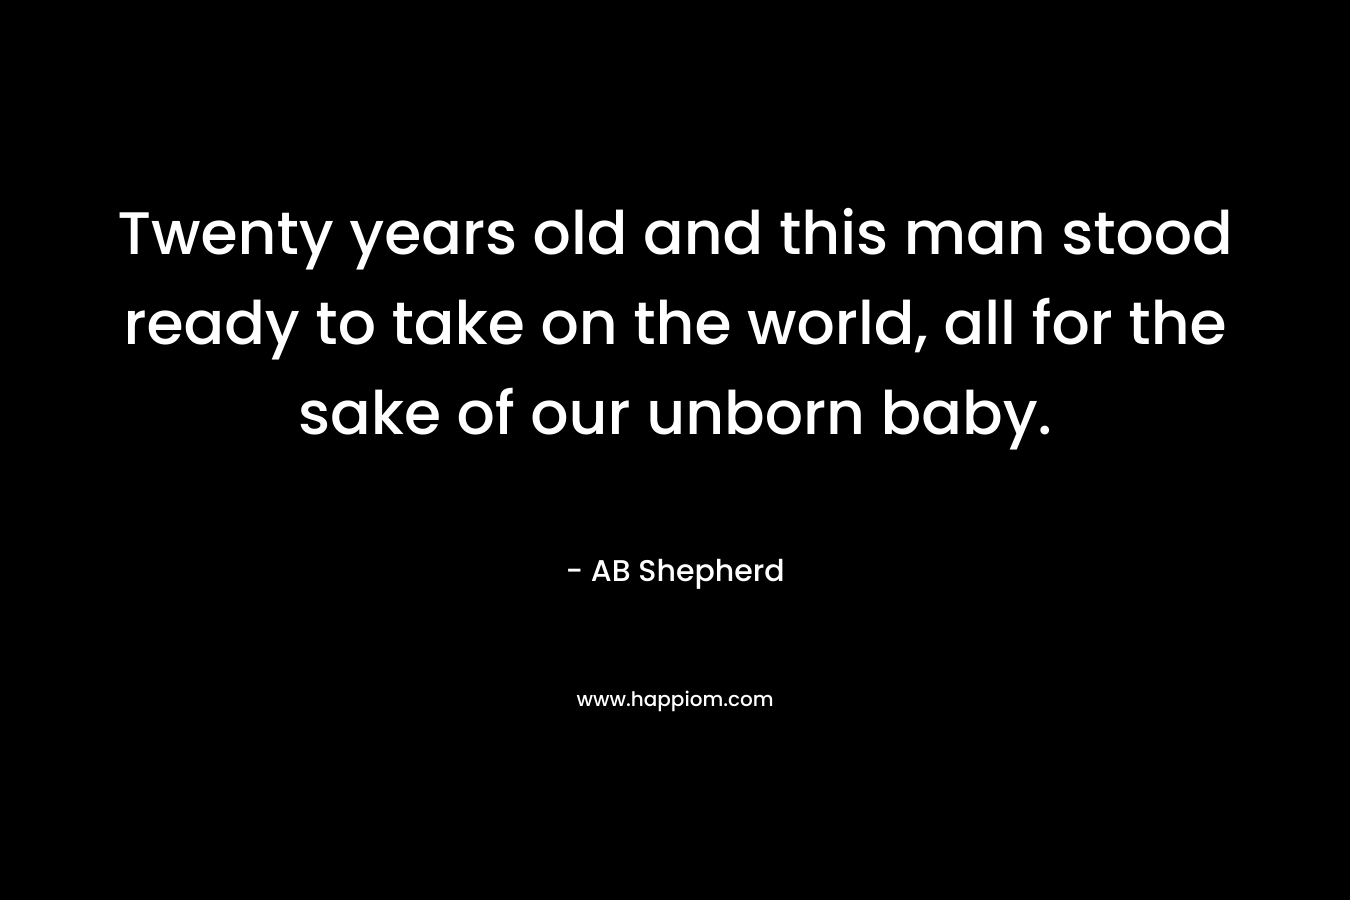 Twenty years old and this man stood ready to take on the world, all for the sake of our unborn baby. – AB Shepherd